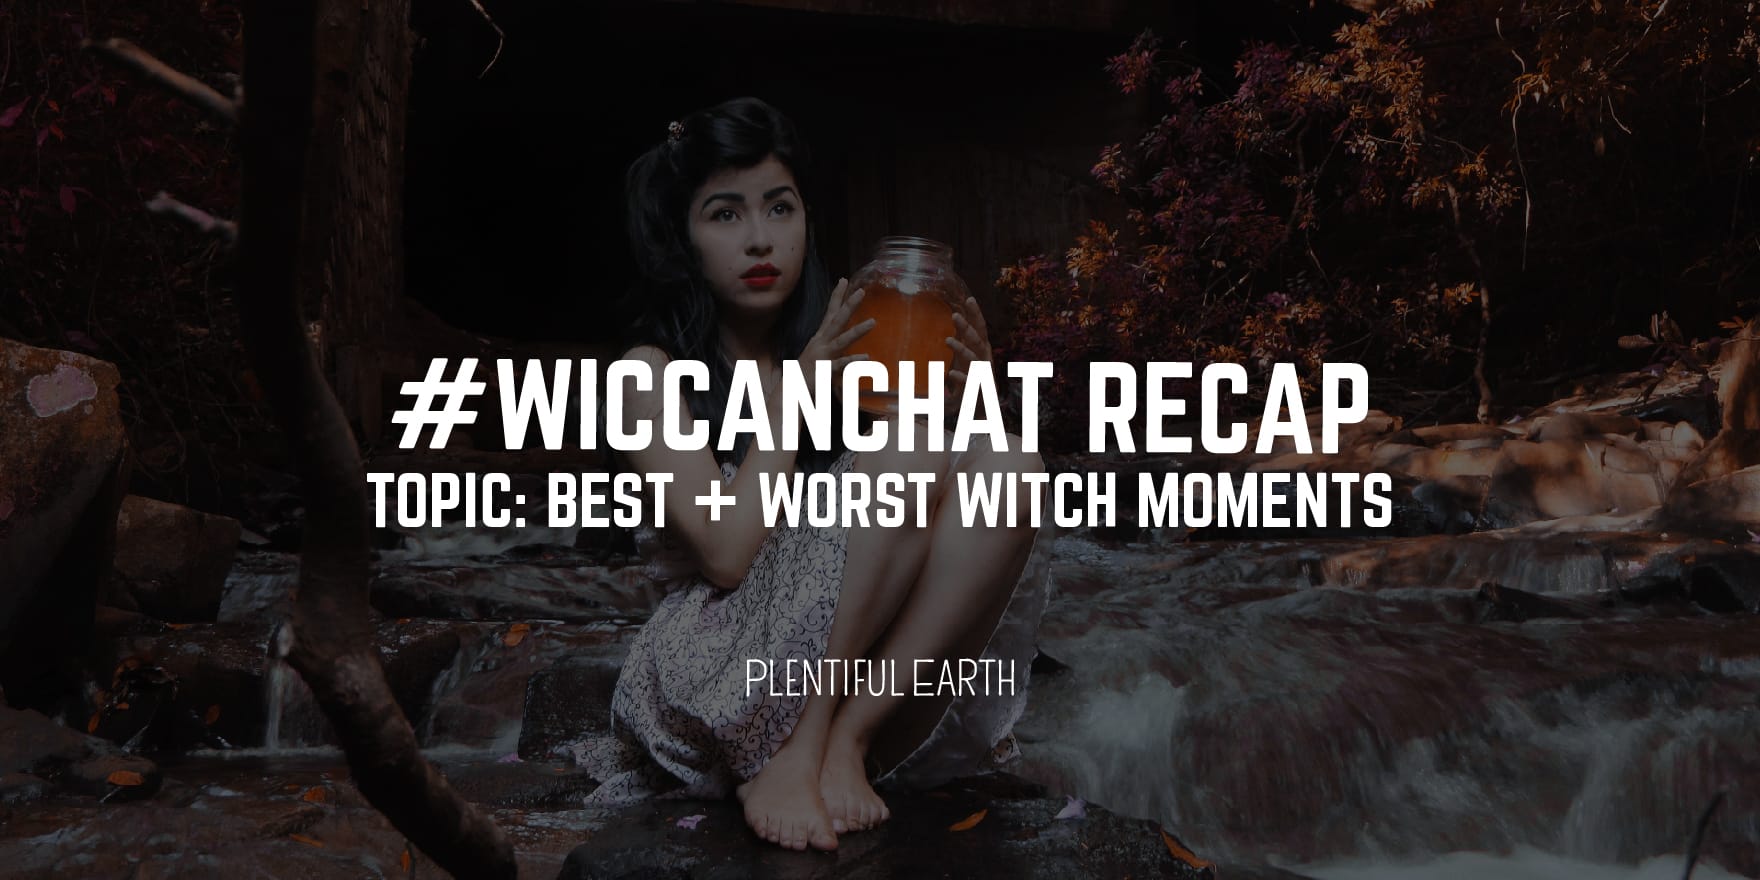 A mystical setting featuring a woman with a jar, conveying an air of enchantment – encapsulating the essence of witchcraft for a #wiccanchat recap on the best and worst witch moments in